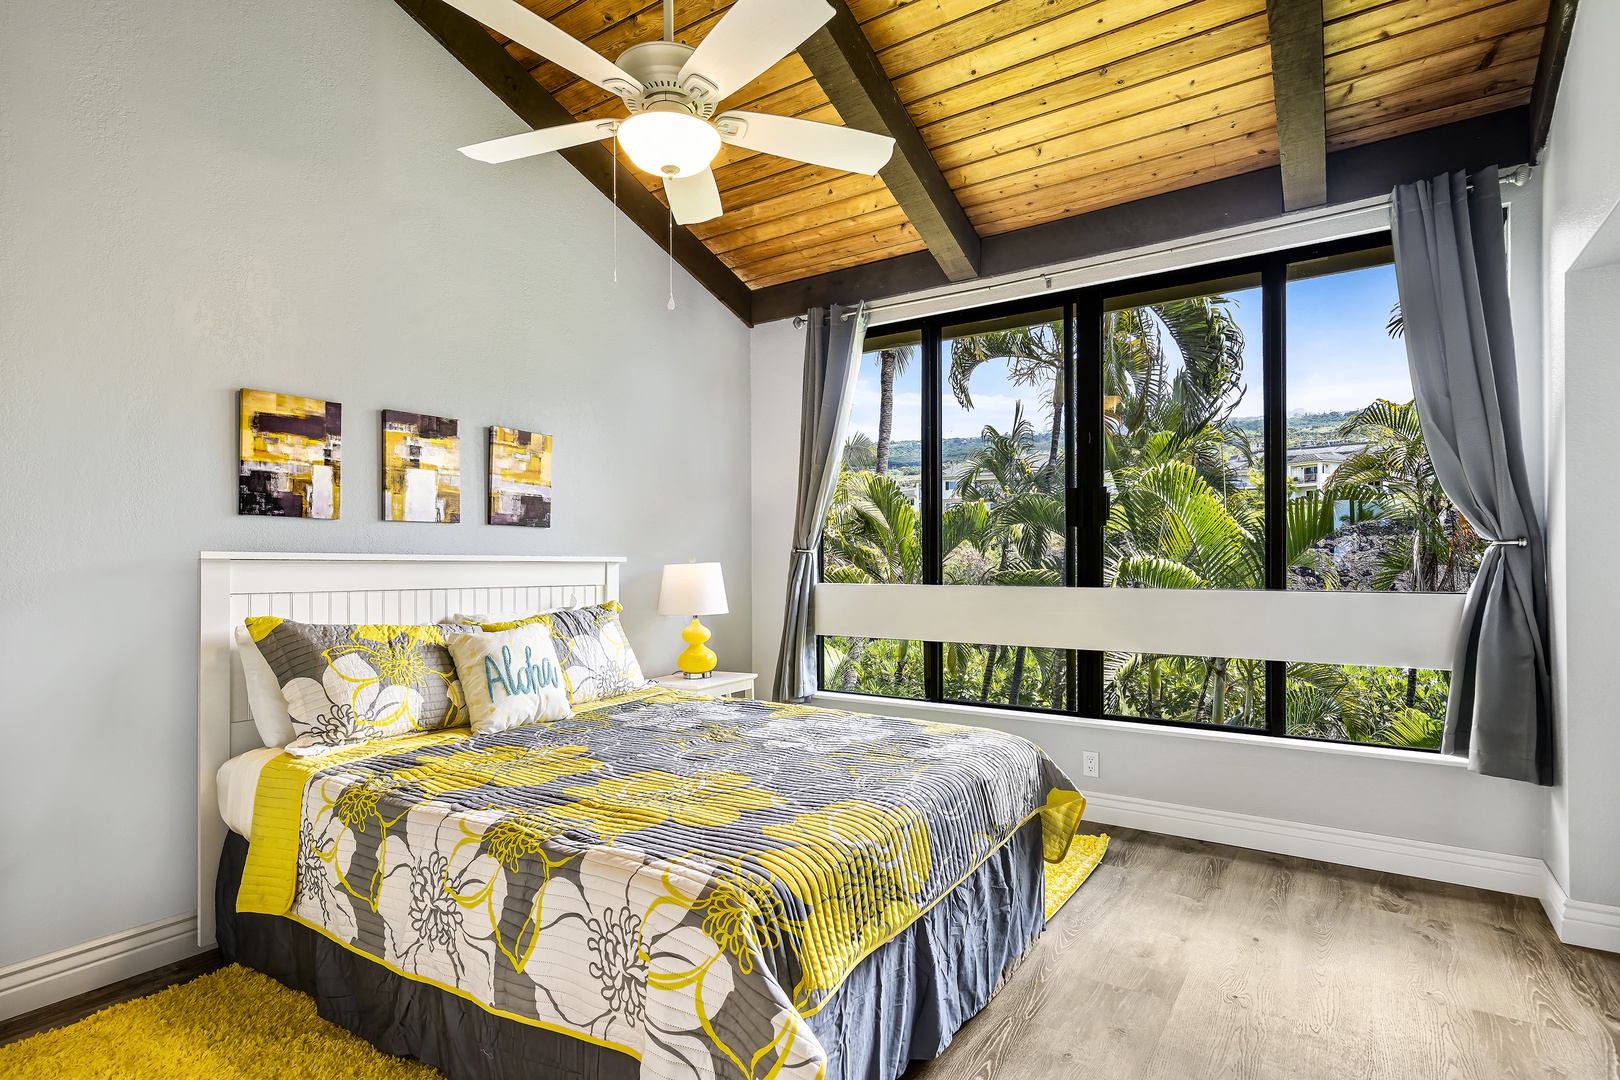 Kailua Kona Vacation Rentals, Keauhou Kona Surf & Racquet 9303 - Guest bedroom offering A/C, mountain views, Queen bed, vaulted ceilings and a rejuvenating color scheme